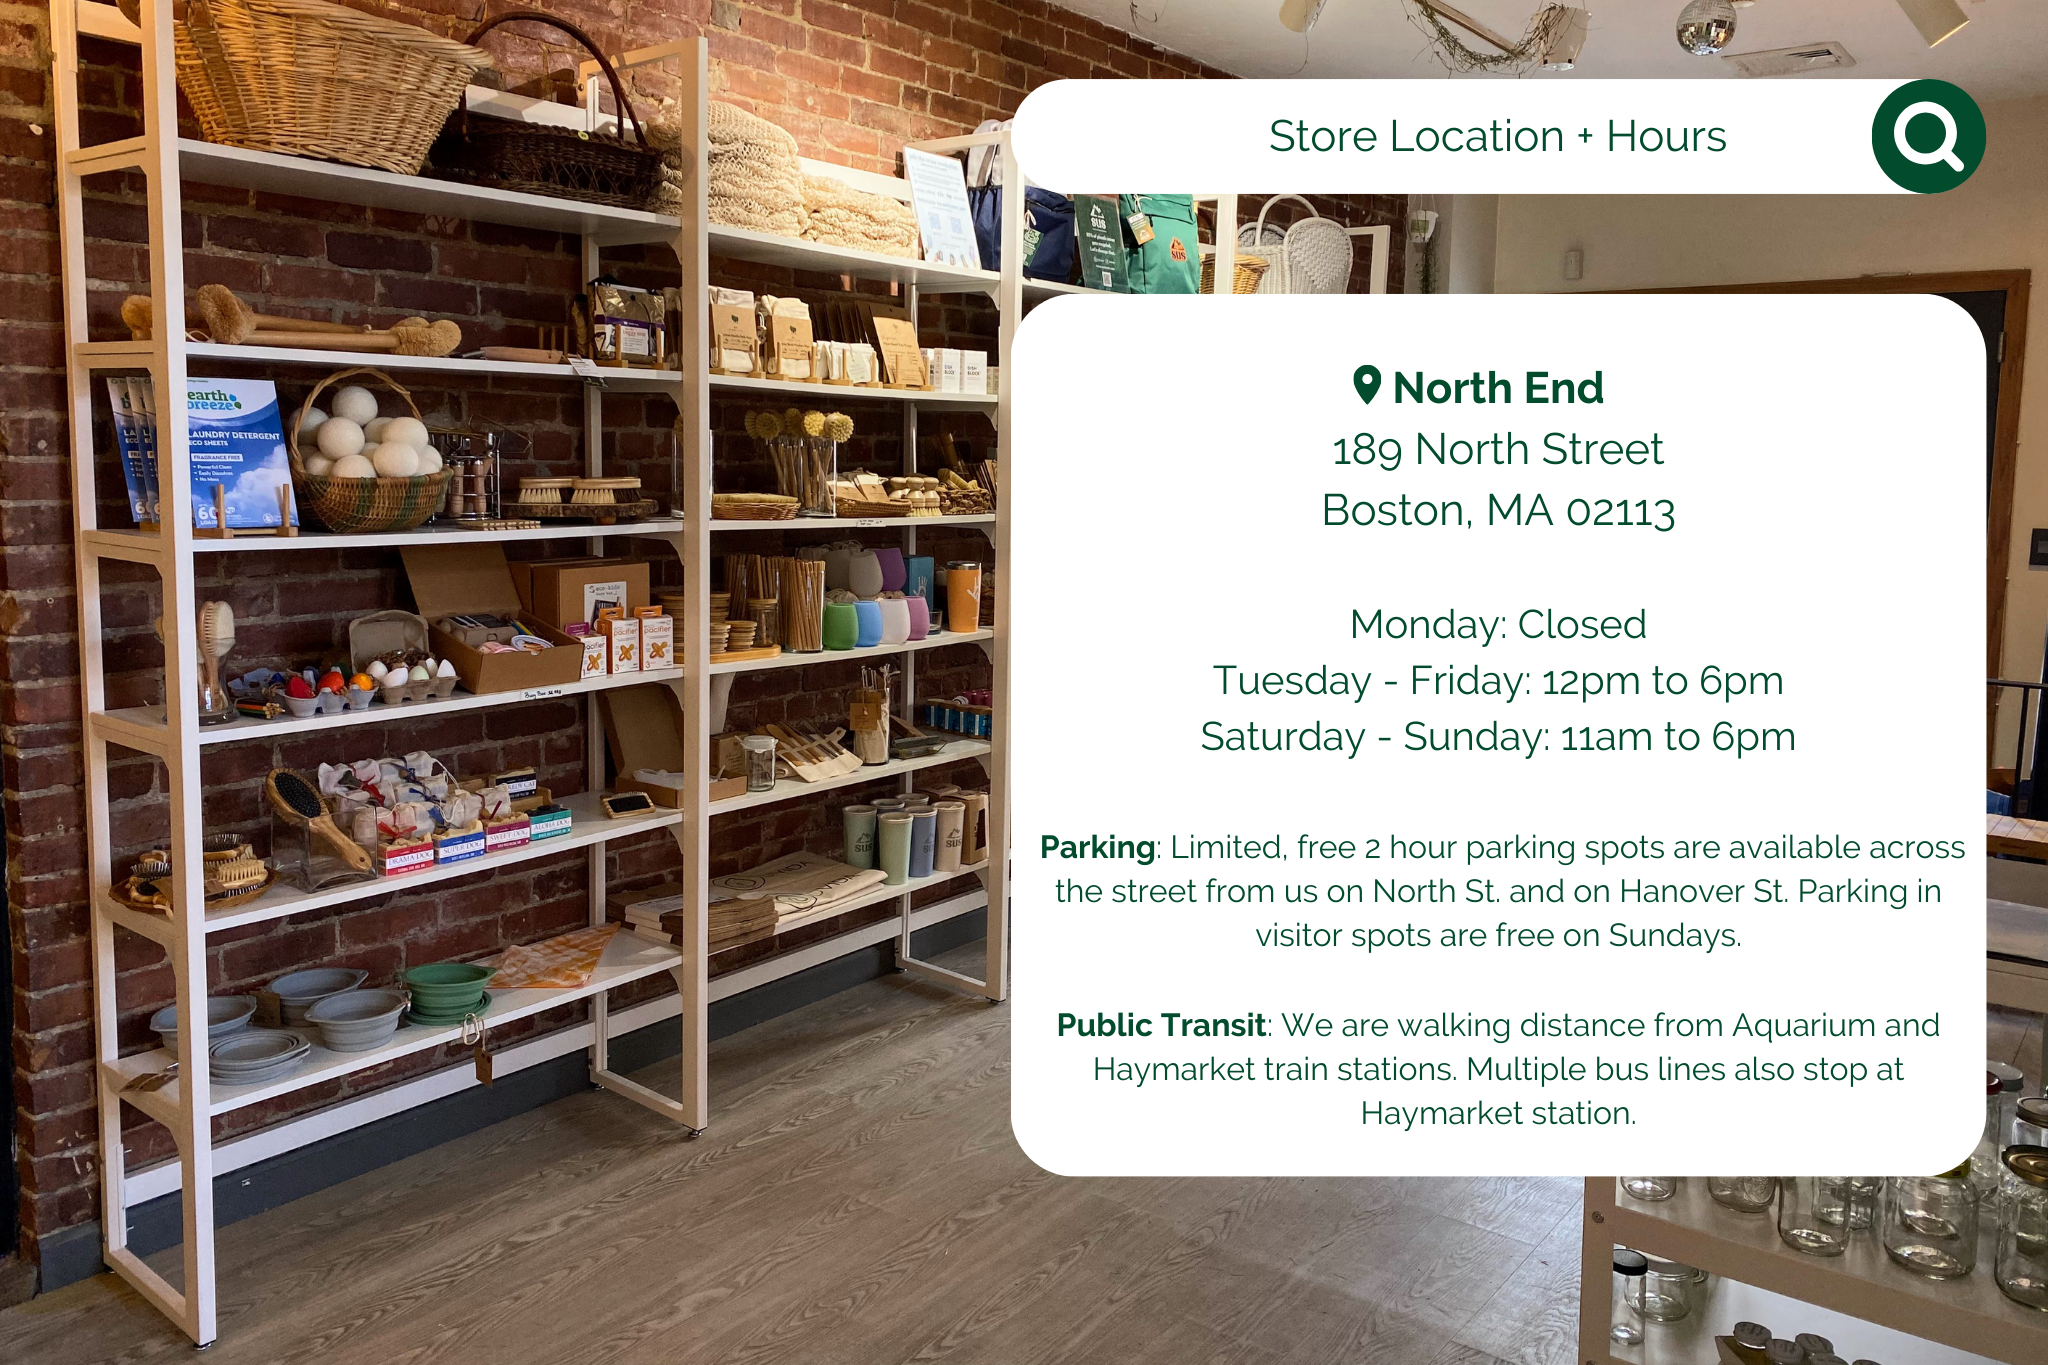 White box with text overlaid on picture of Uvida's plastic-free products shelves. [TEXT: Store Location + Hours. North End: 189 North Street Boston, MA 02113. Monday: Closed. Tuesday - Friday: 12pm to 6pm. Saturday - Sunday: 11am to 6pm.]